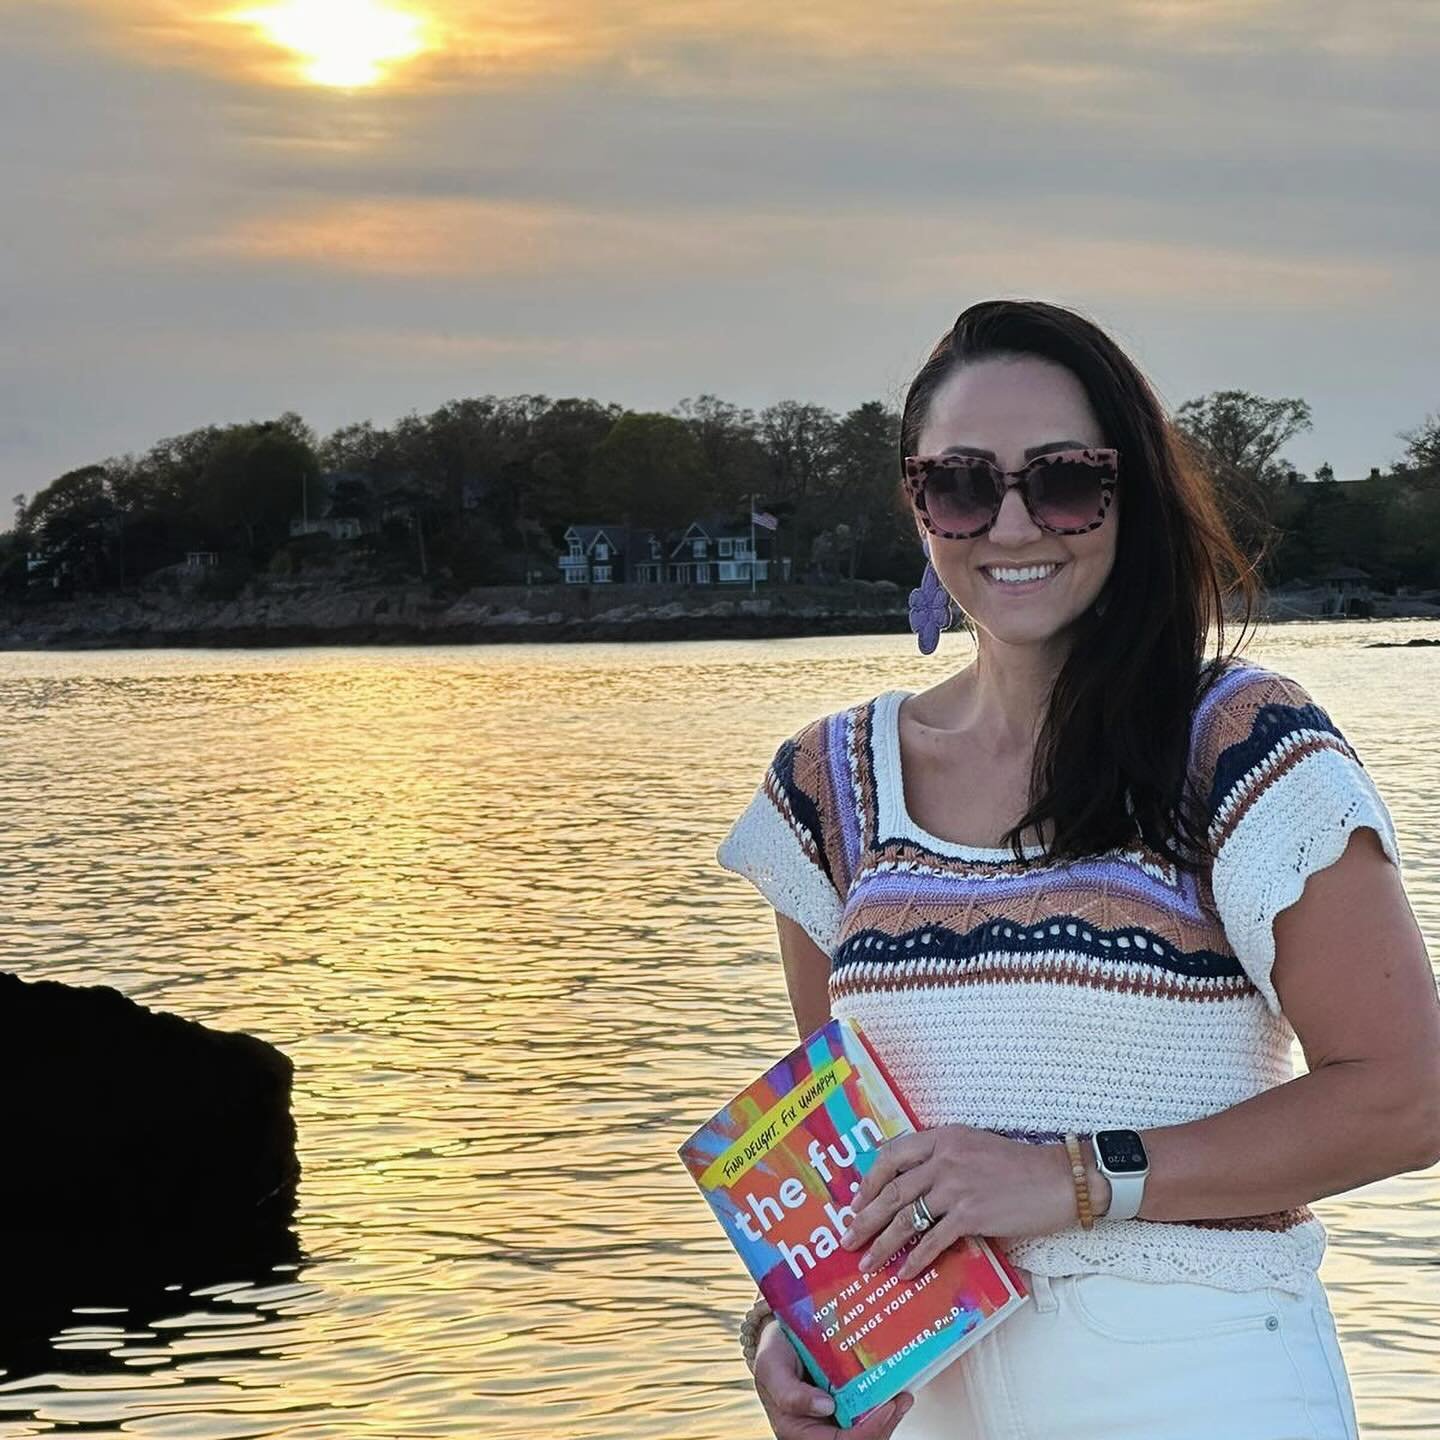 Scenes from the first Mindful Book Club 📖💓💌🗣️🥗🌅

The Fun Habit by @thewonderoffun was the perfect book to kick things off with a focus on how the pursuit of joy and wonder can change your life. Based on the feedback from some of our members ➡️,